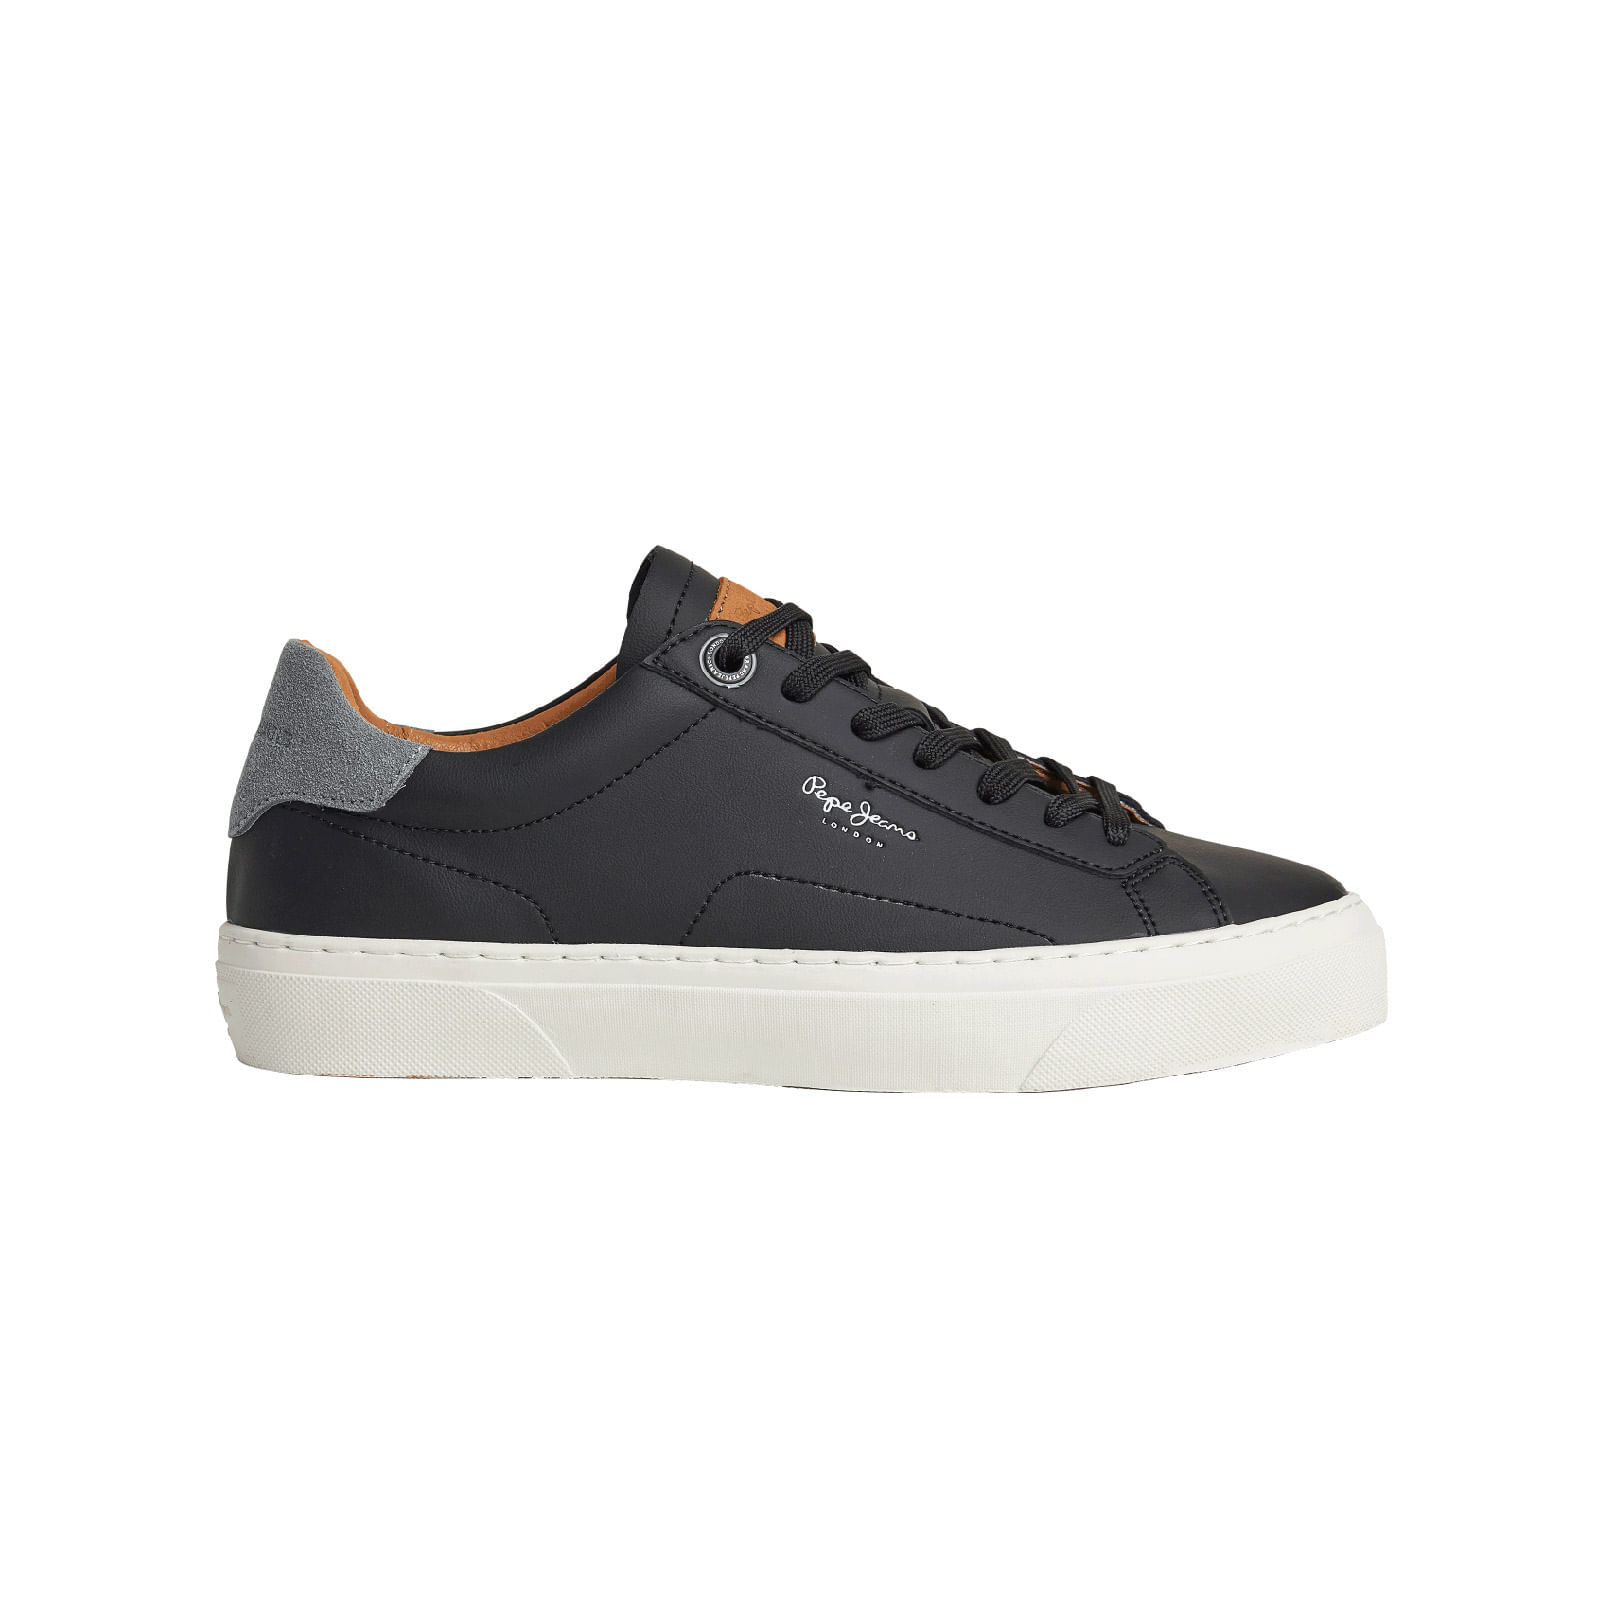 Tenis Pepe Jeans Player Basic Summer Color Blanco para Hombre PEPE